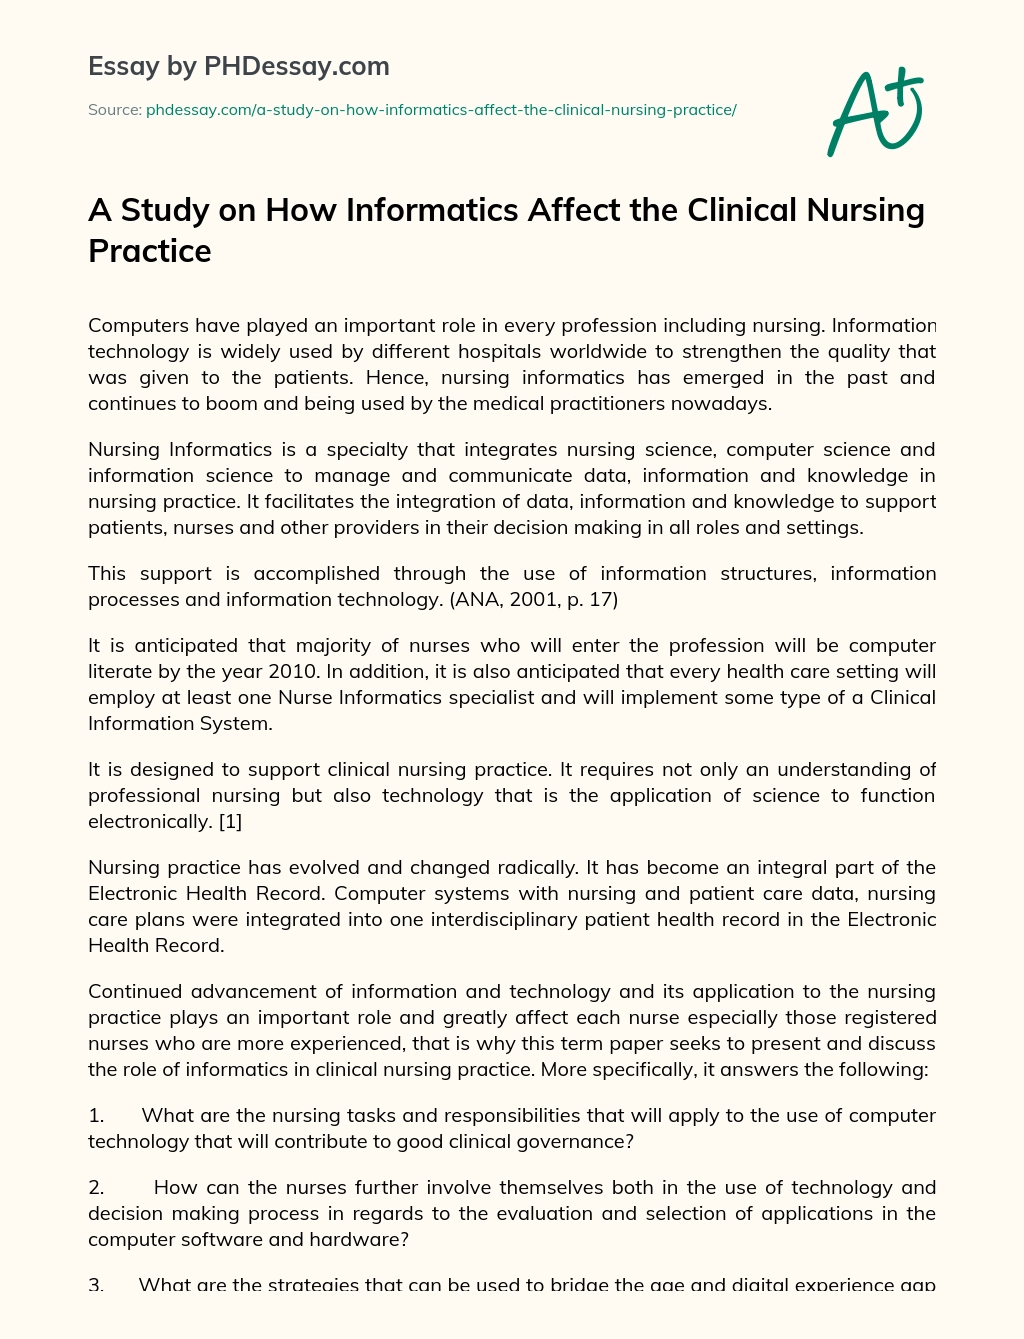 A Study on How Informatics Affect the Clinical Nursing Practice essay